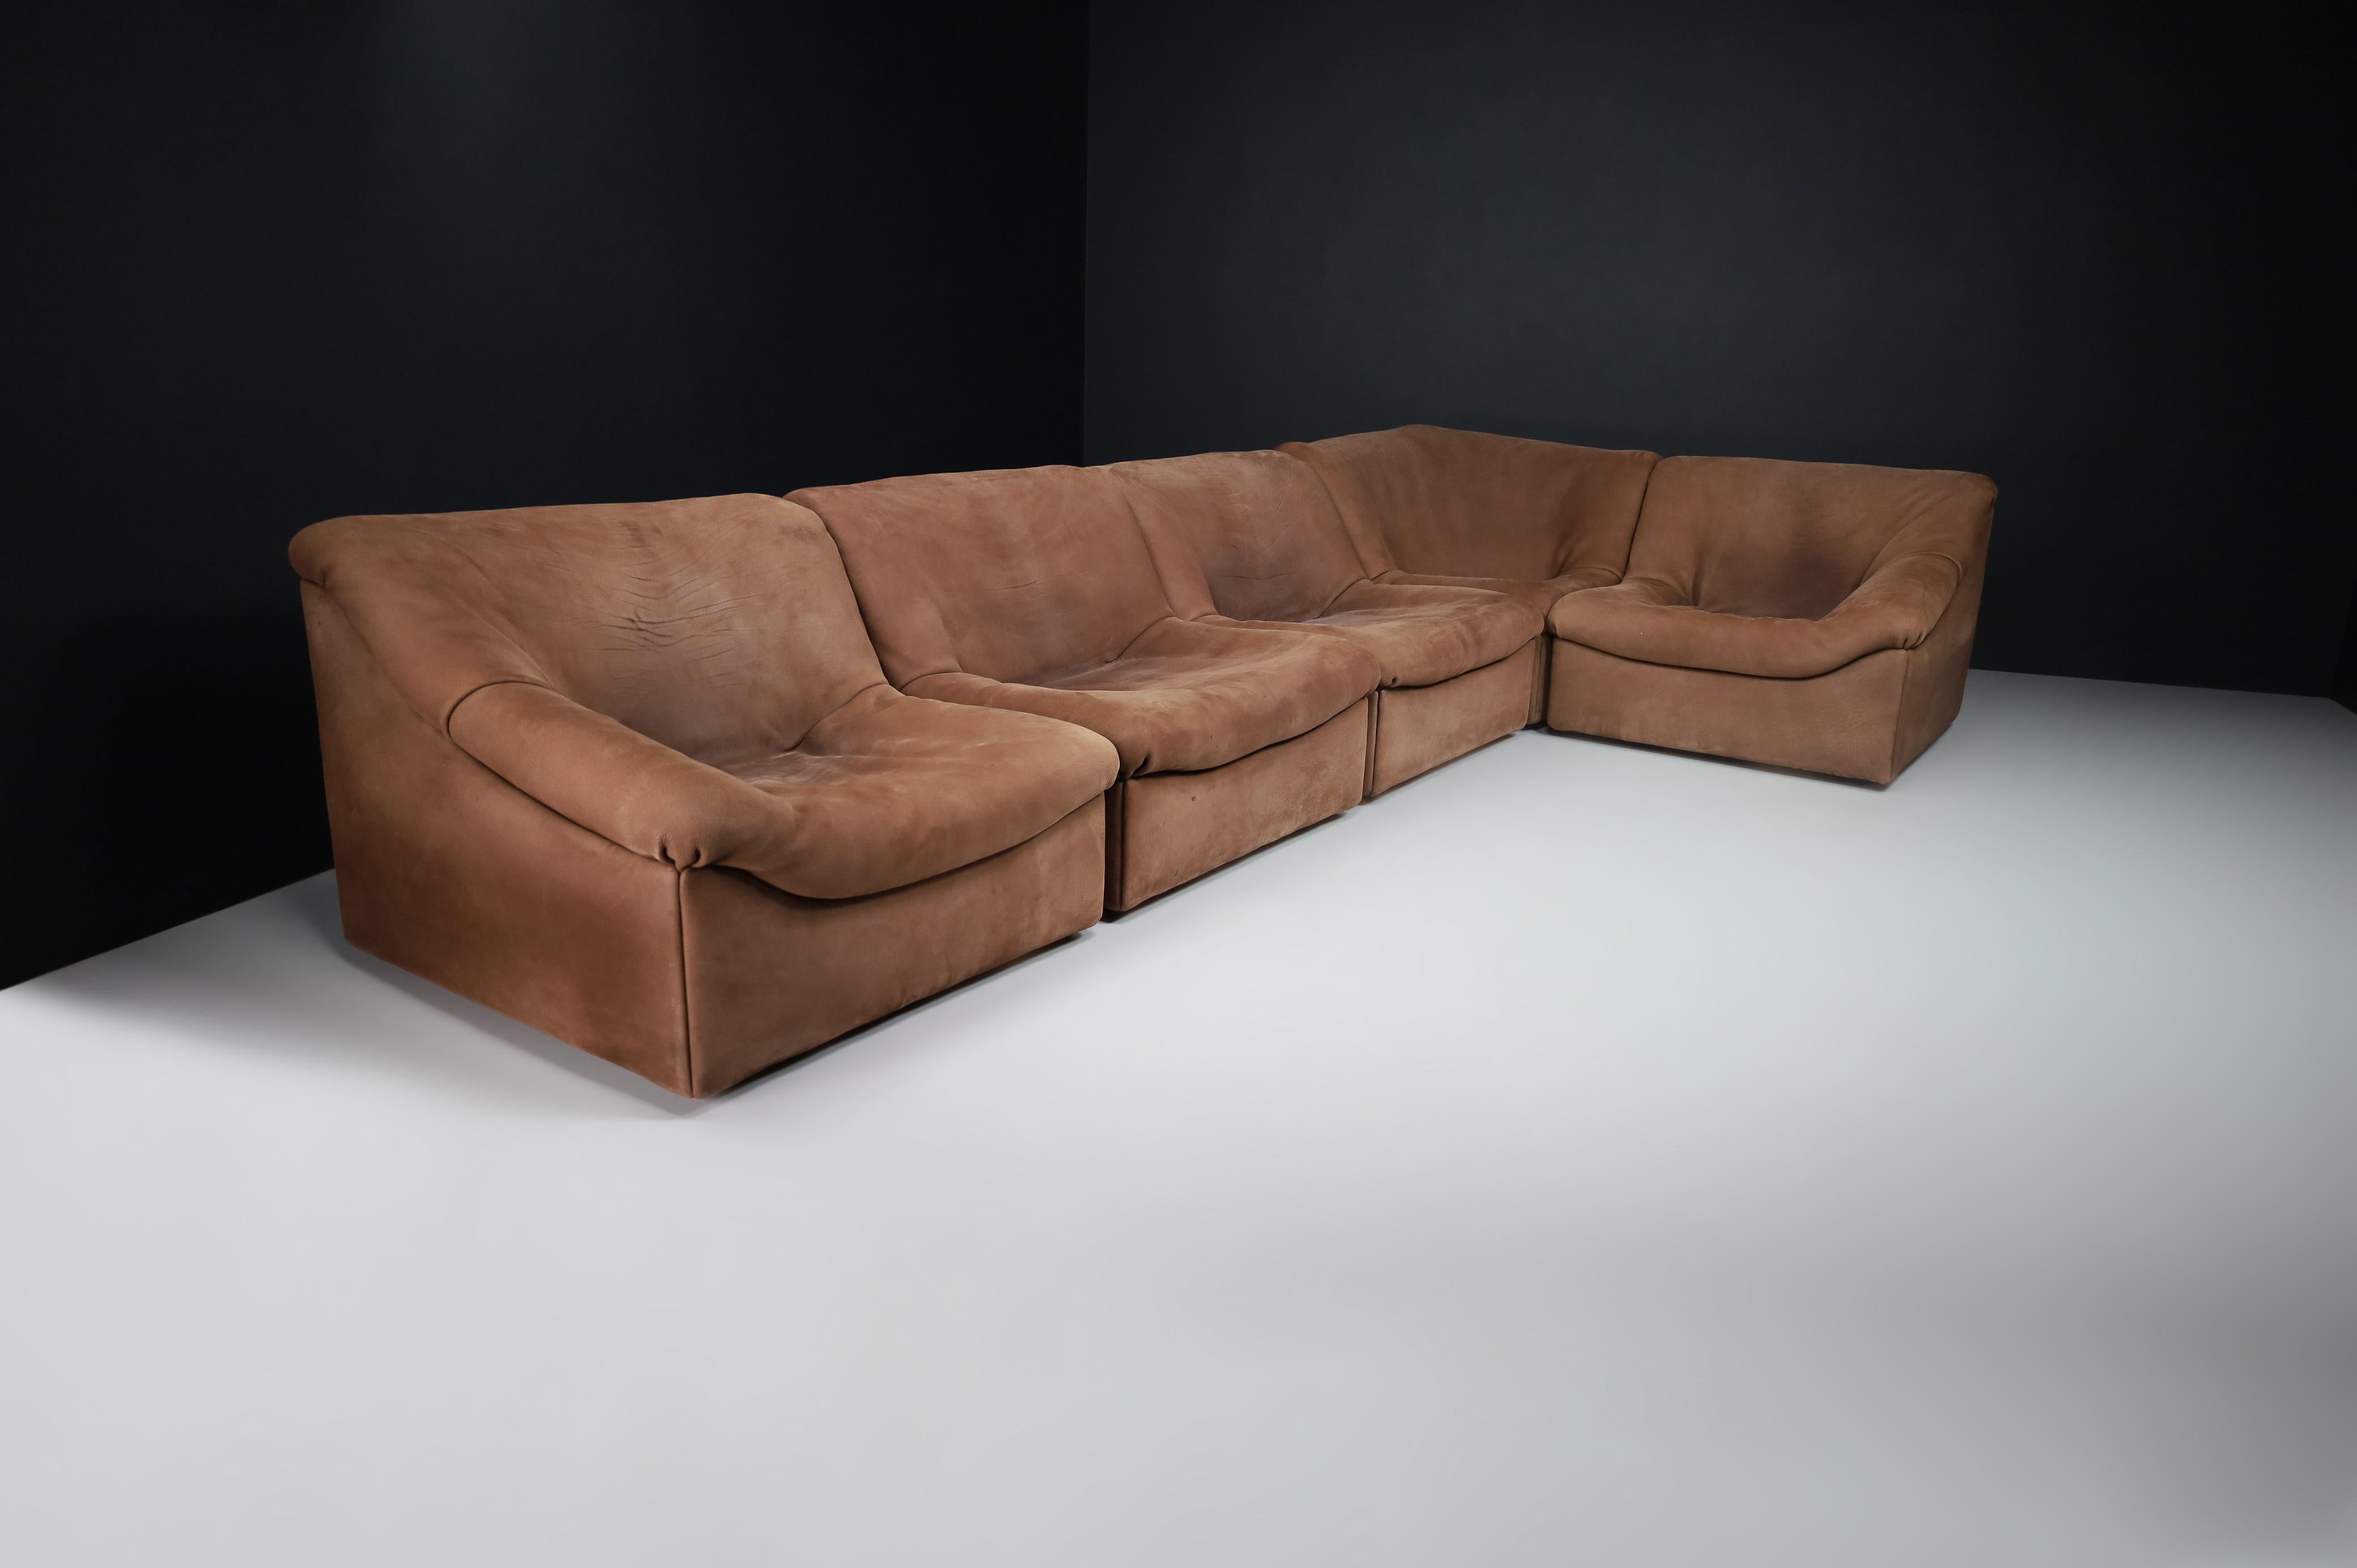 De Sede DS46 Sectional Sofa-Livingroomset in Buffalo Leather, Switzerland 1970s For Sale 1